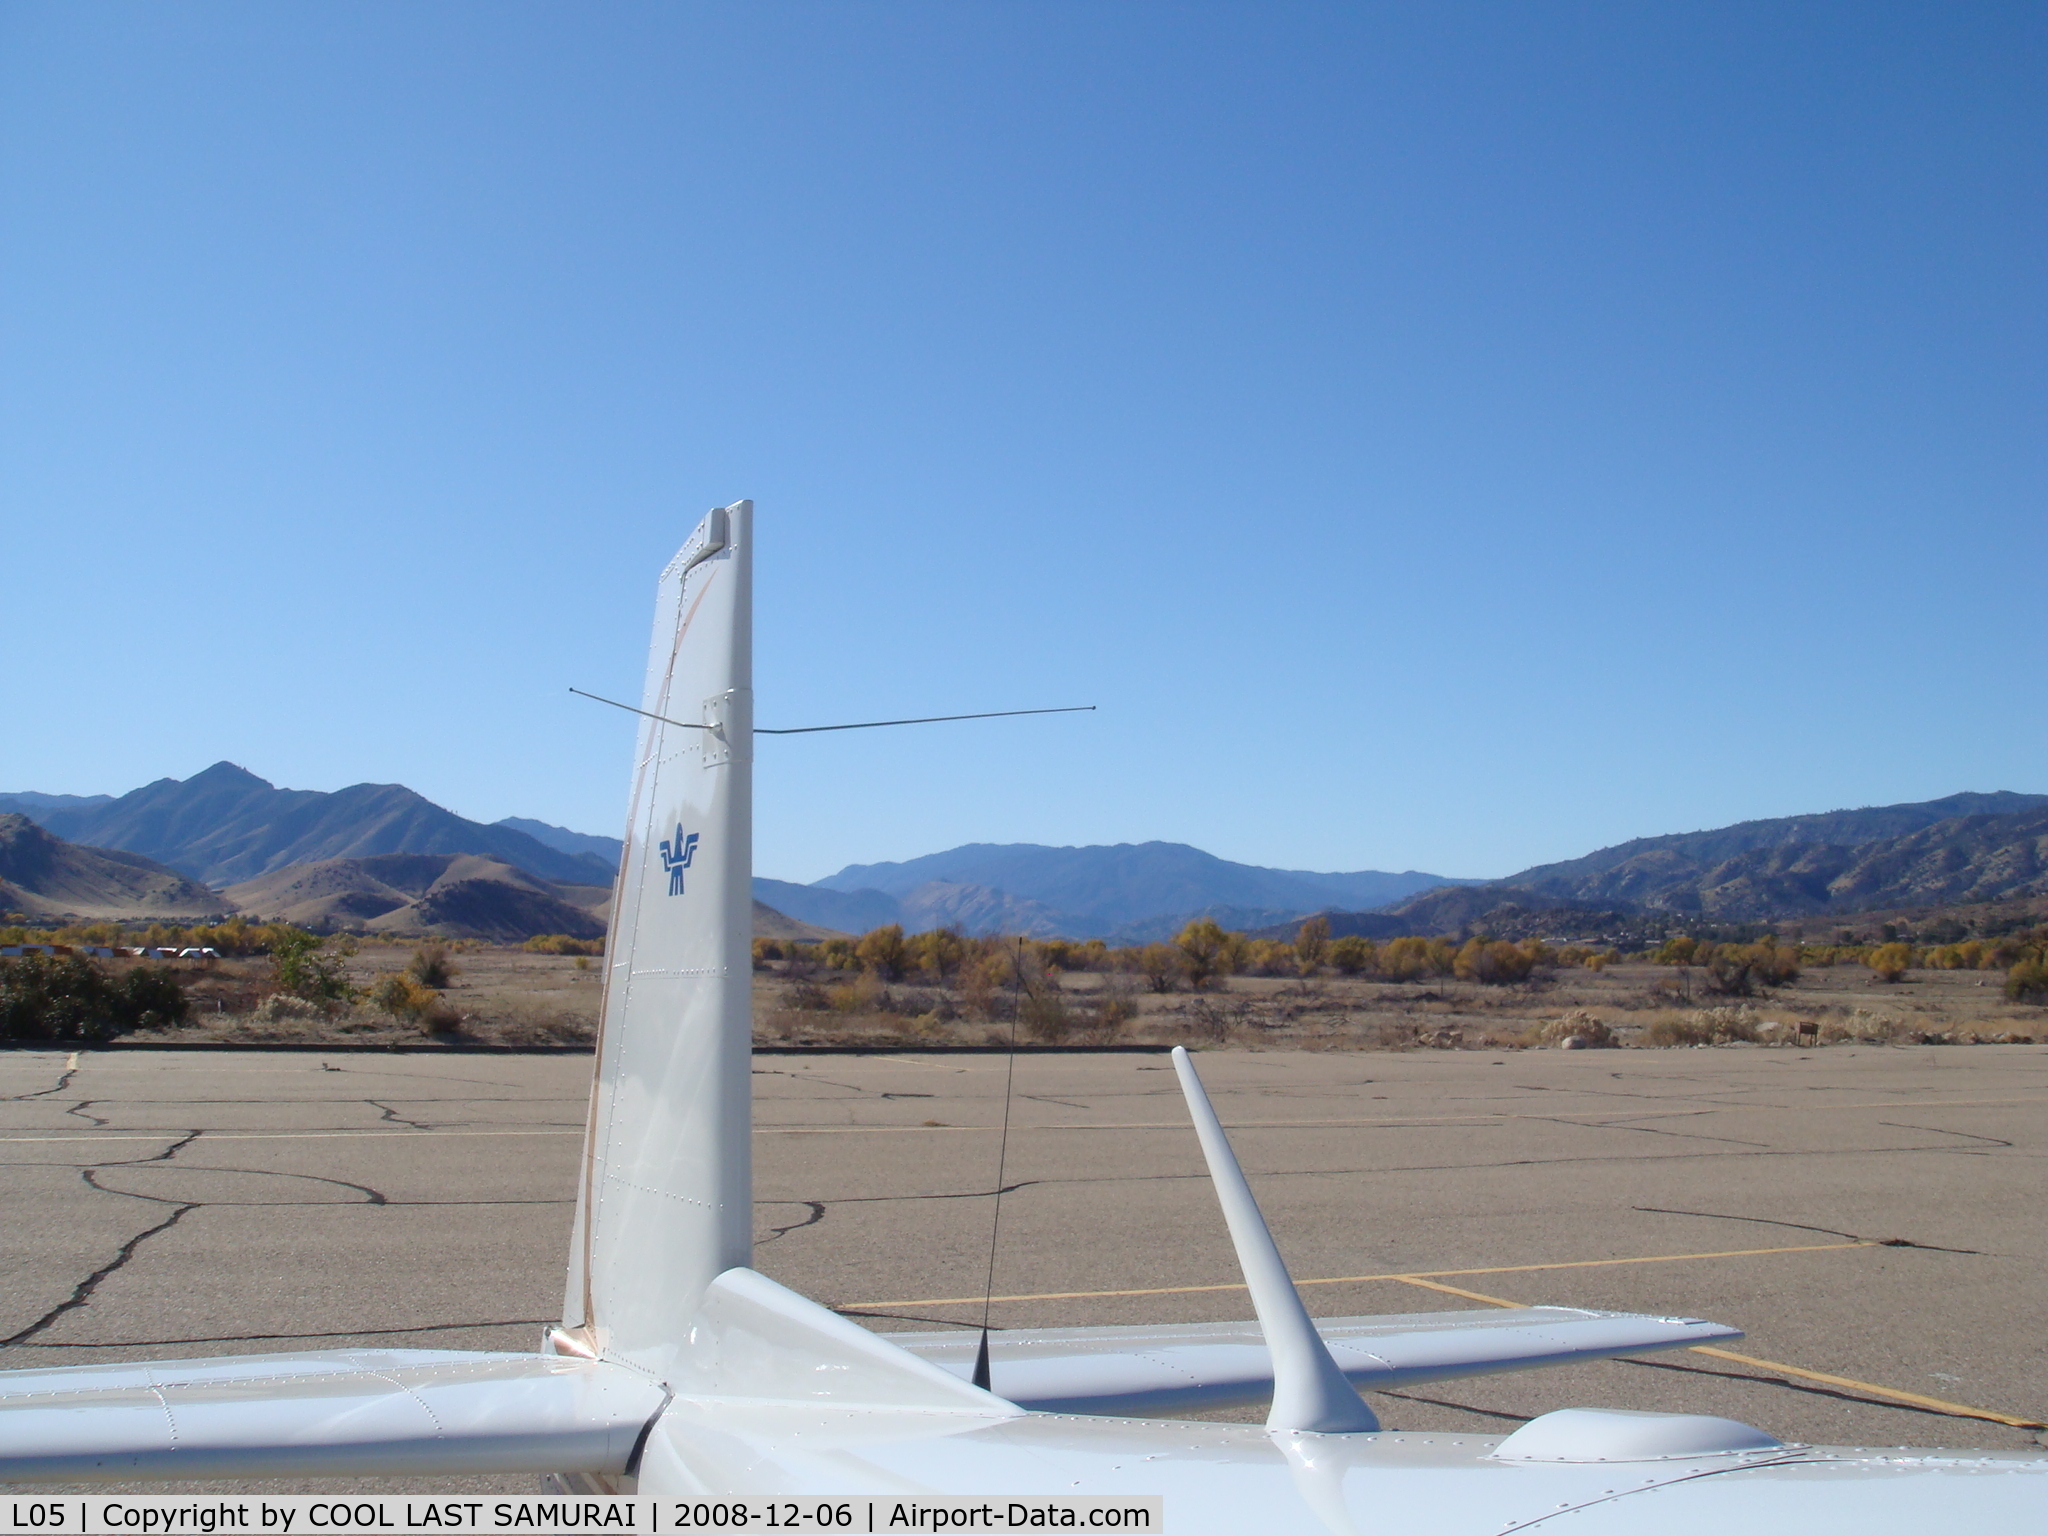 Kern Valley Airport (L05) - A View from Kernville Transient Parking